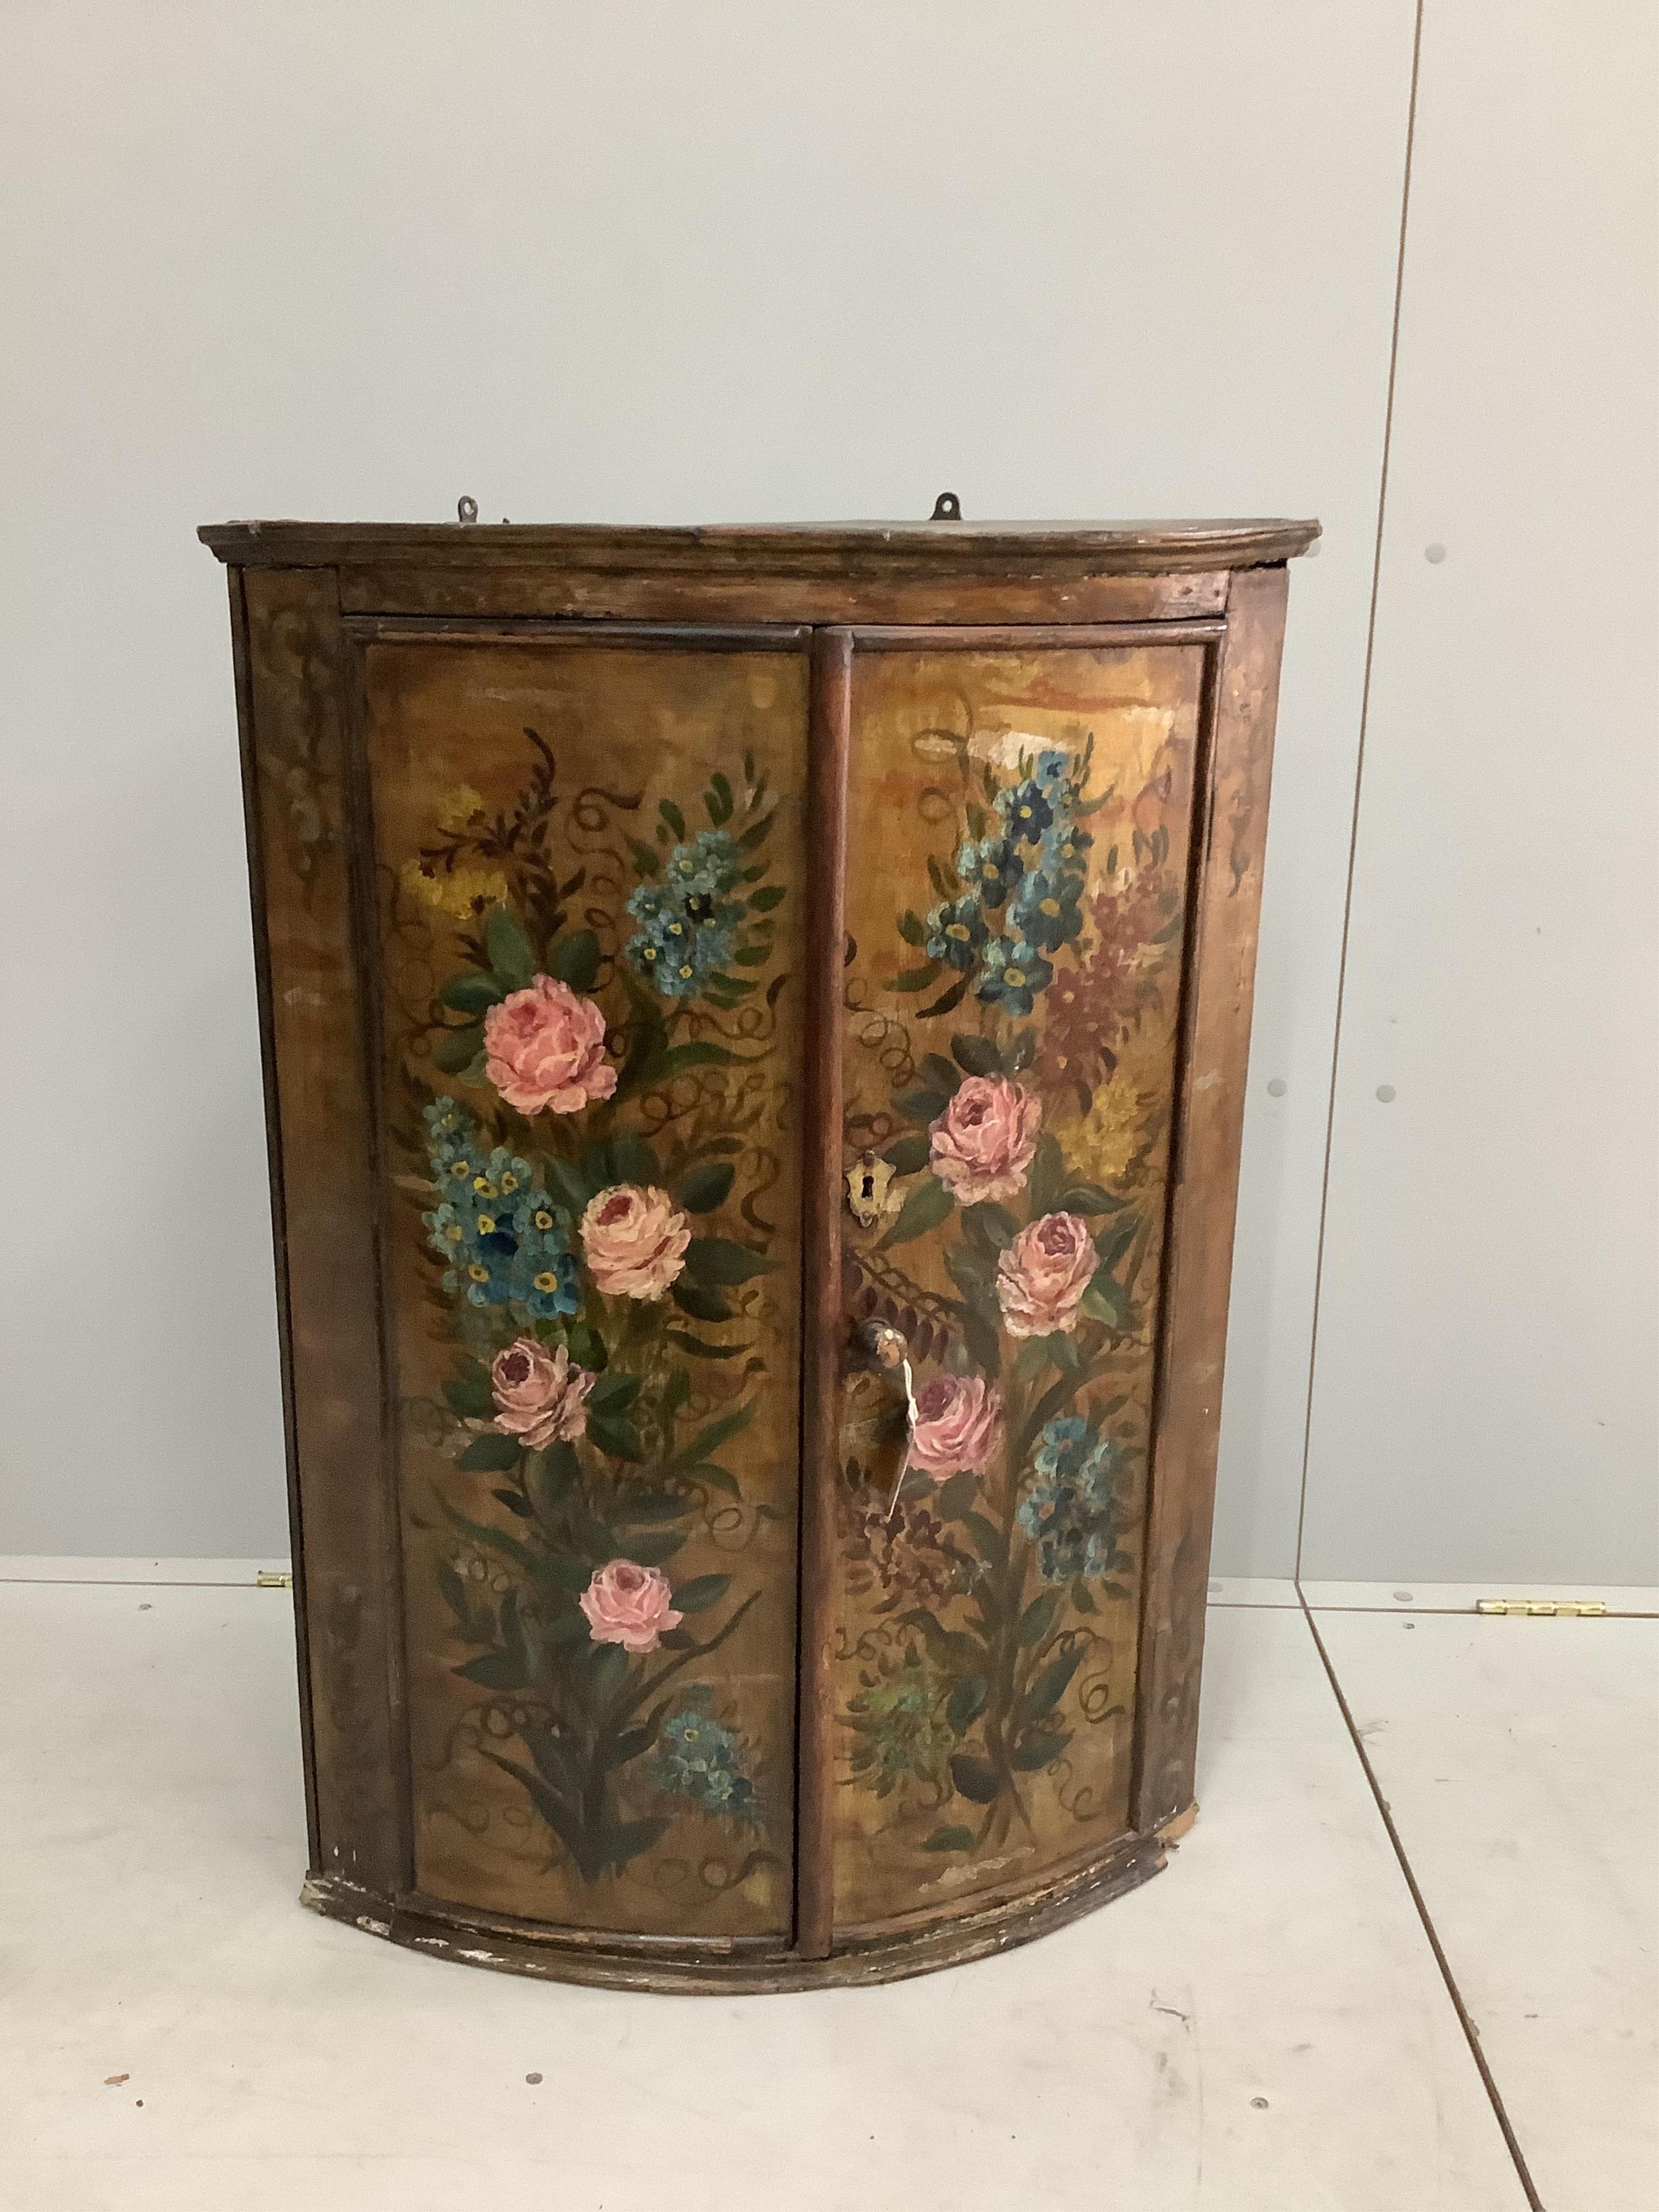 An 18th century Dutch bowfront hanging corner cupboard, later painted, width 66cm, depth 45cm, height 92cm. Condition - fair